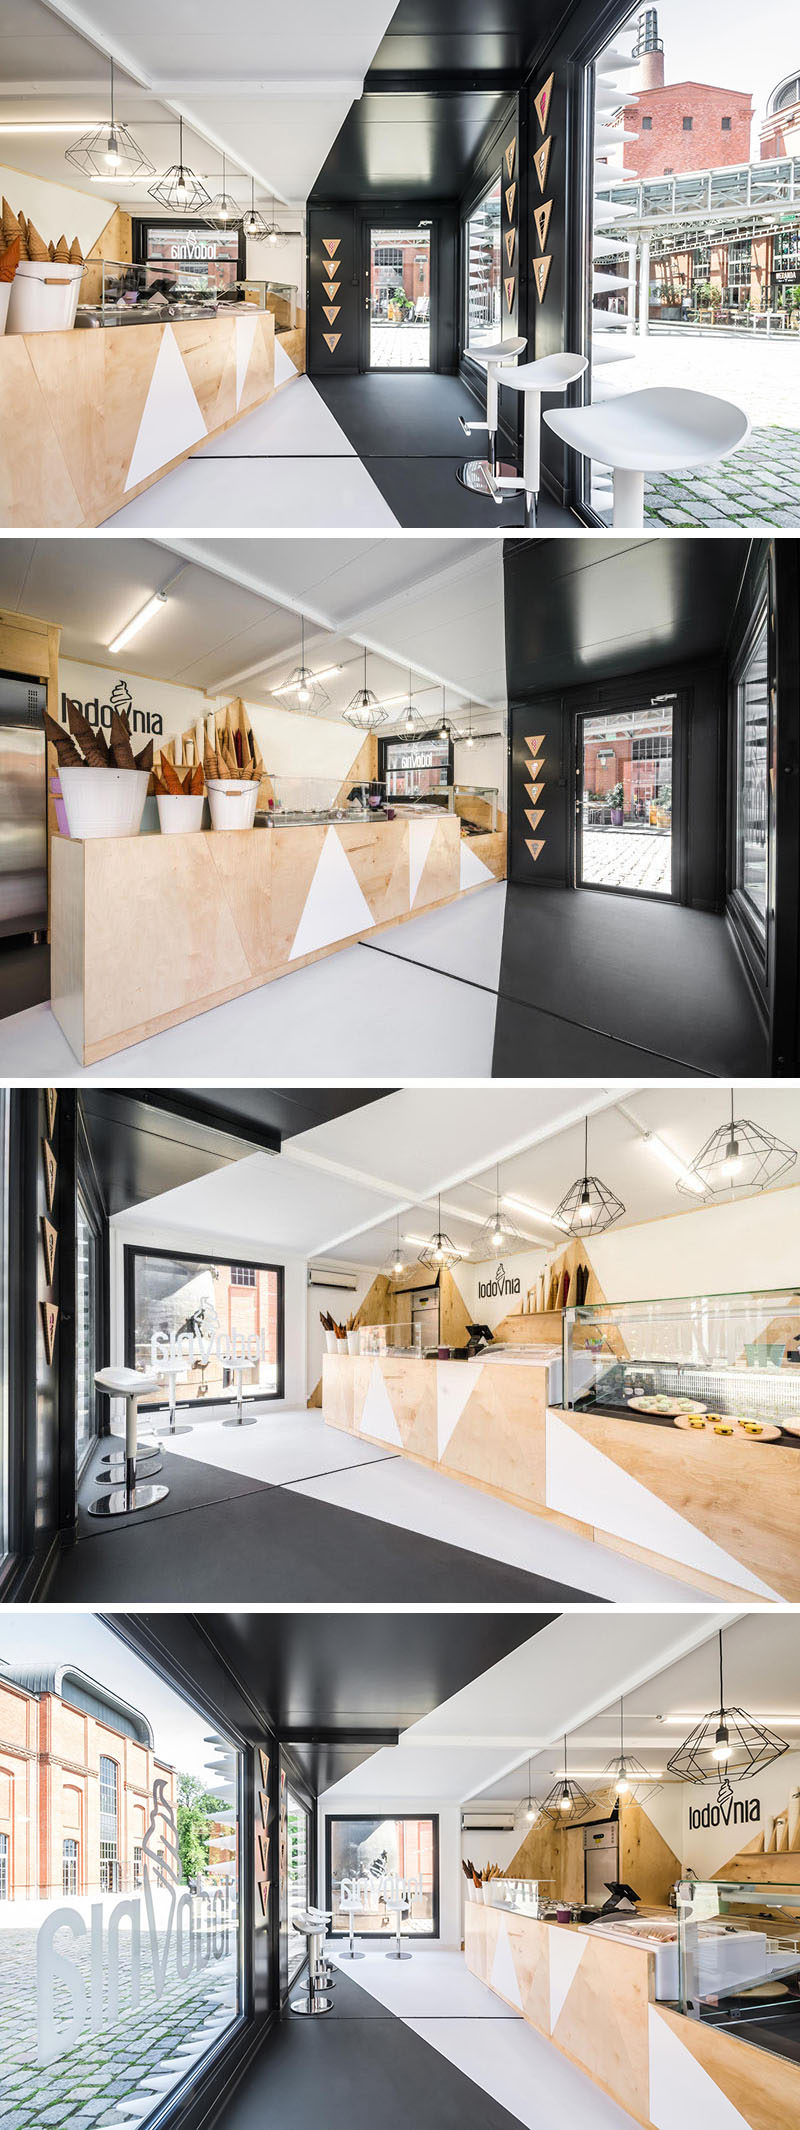 This modern ice cream shop in Poland has a black and white interior that's softened up by the use of natural plywood.